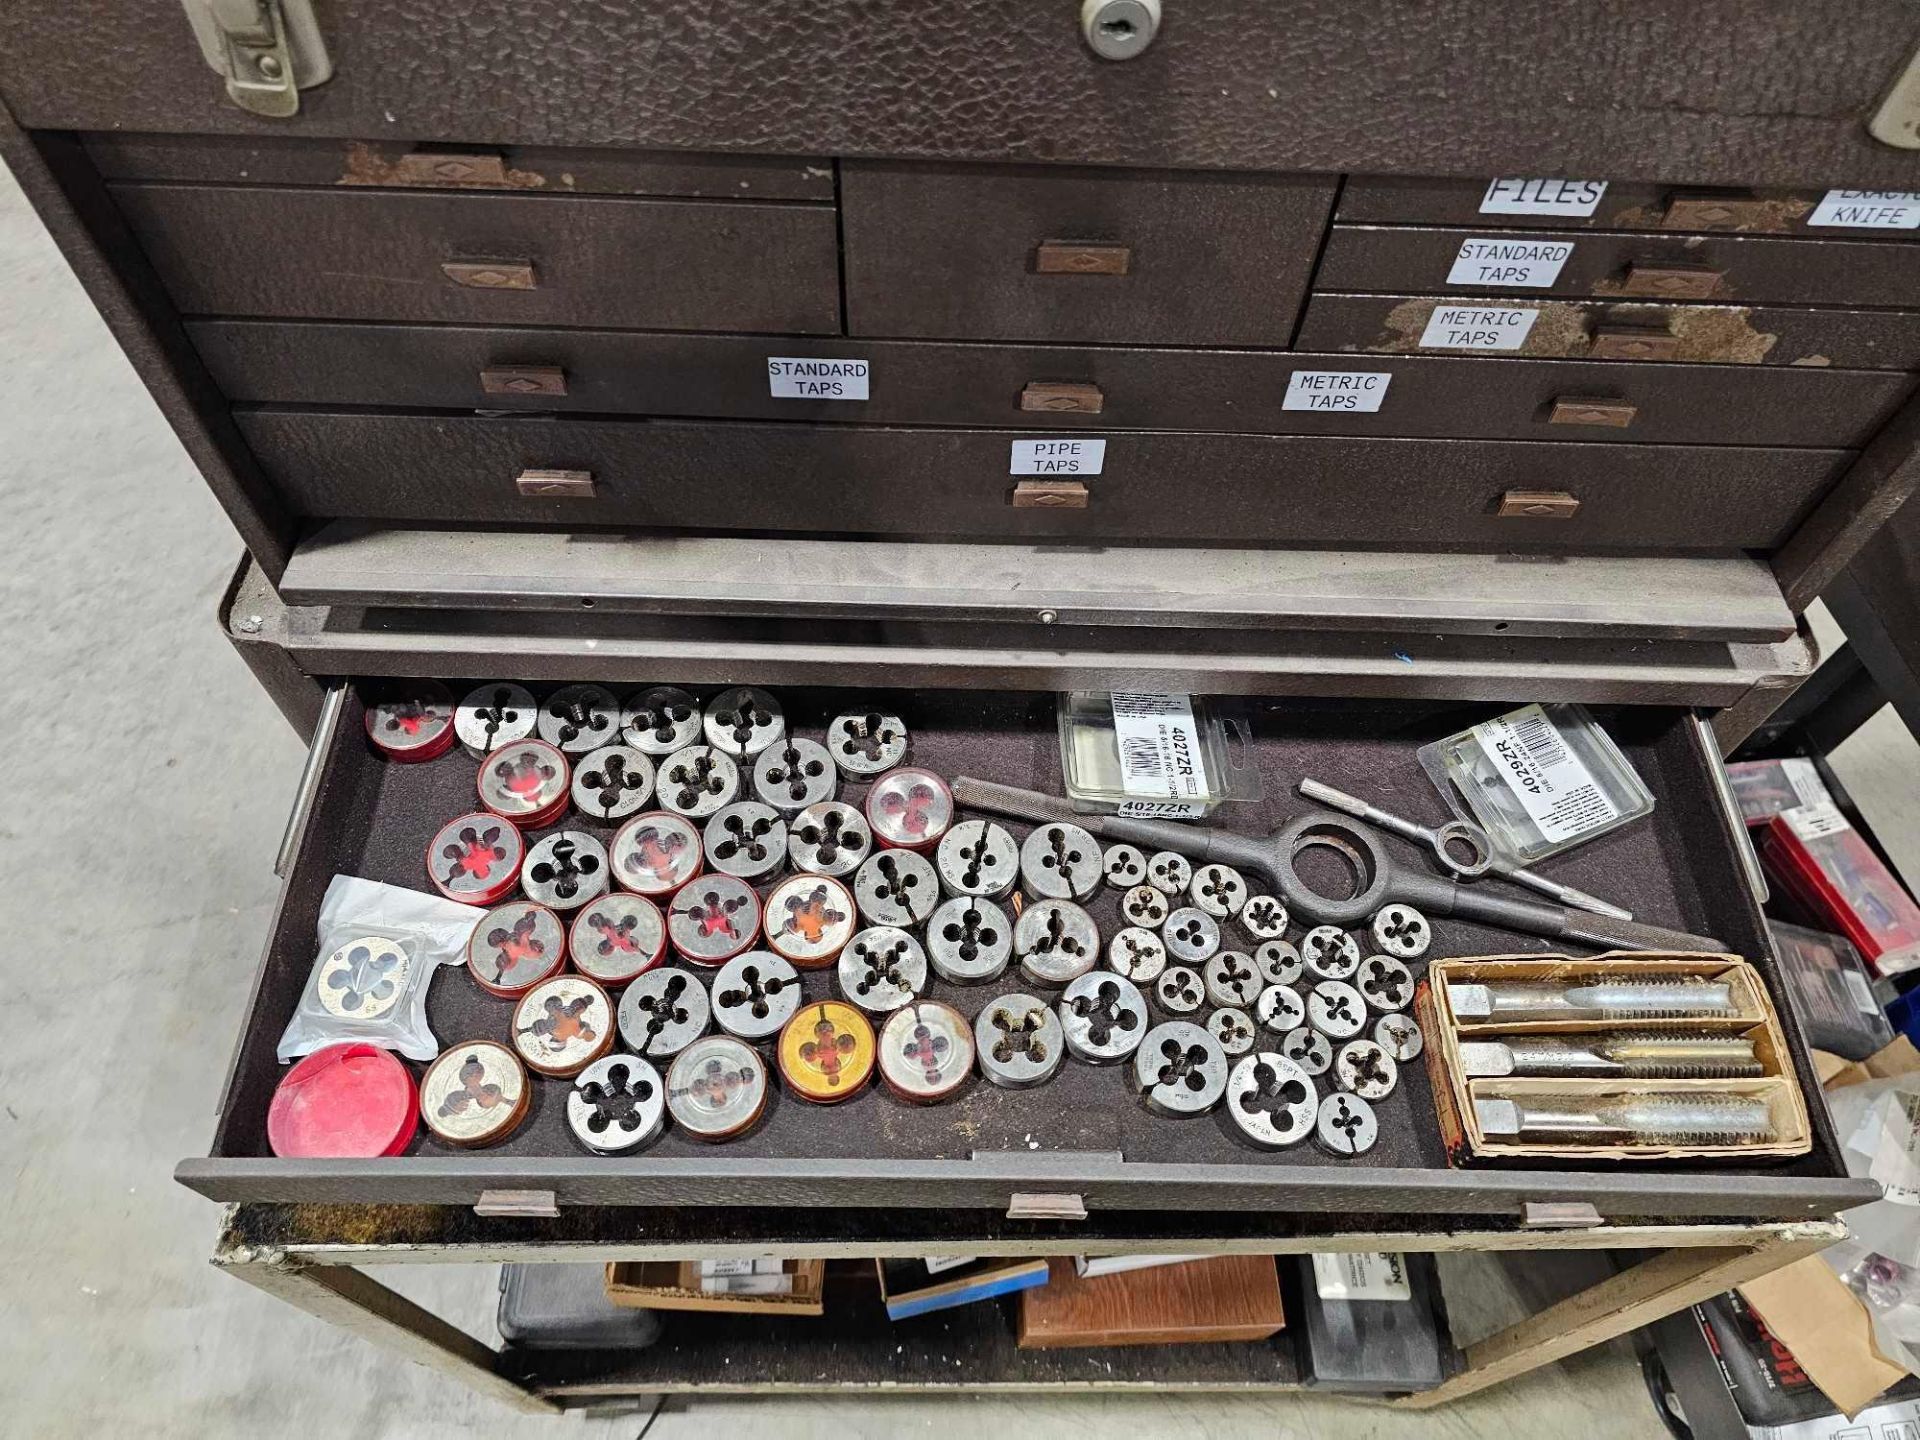 KENNEDY TOOL BOXES LOADED WITH MACHINISTS TOOLS AND MEASURING DEVICES - Image 15 of 45